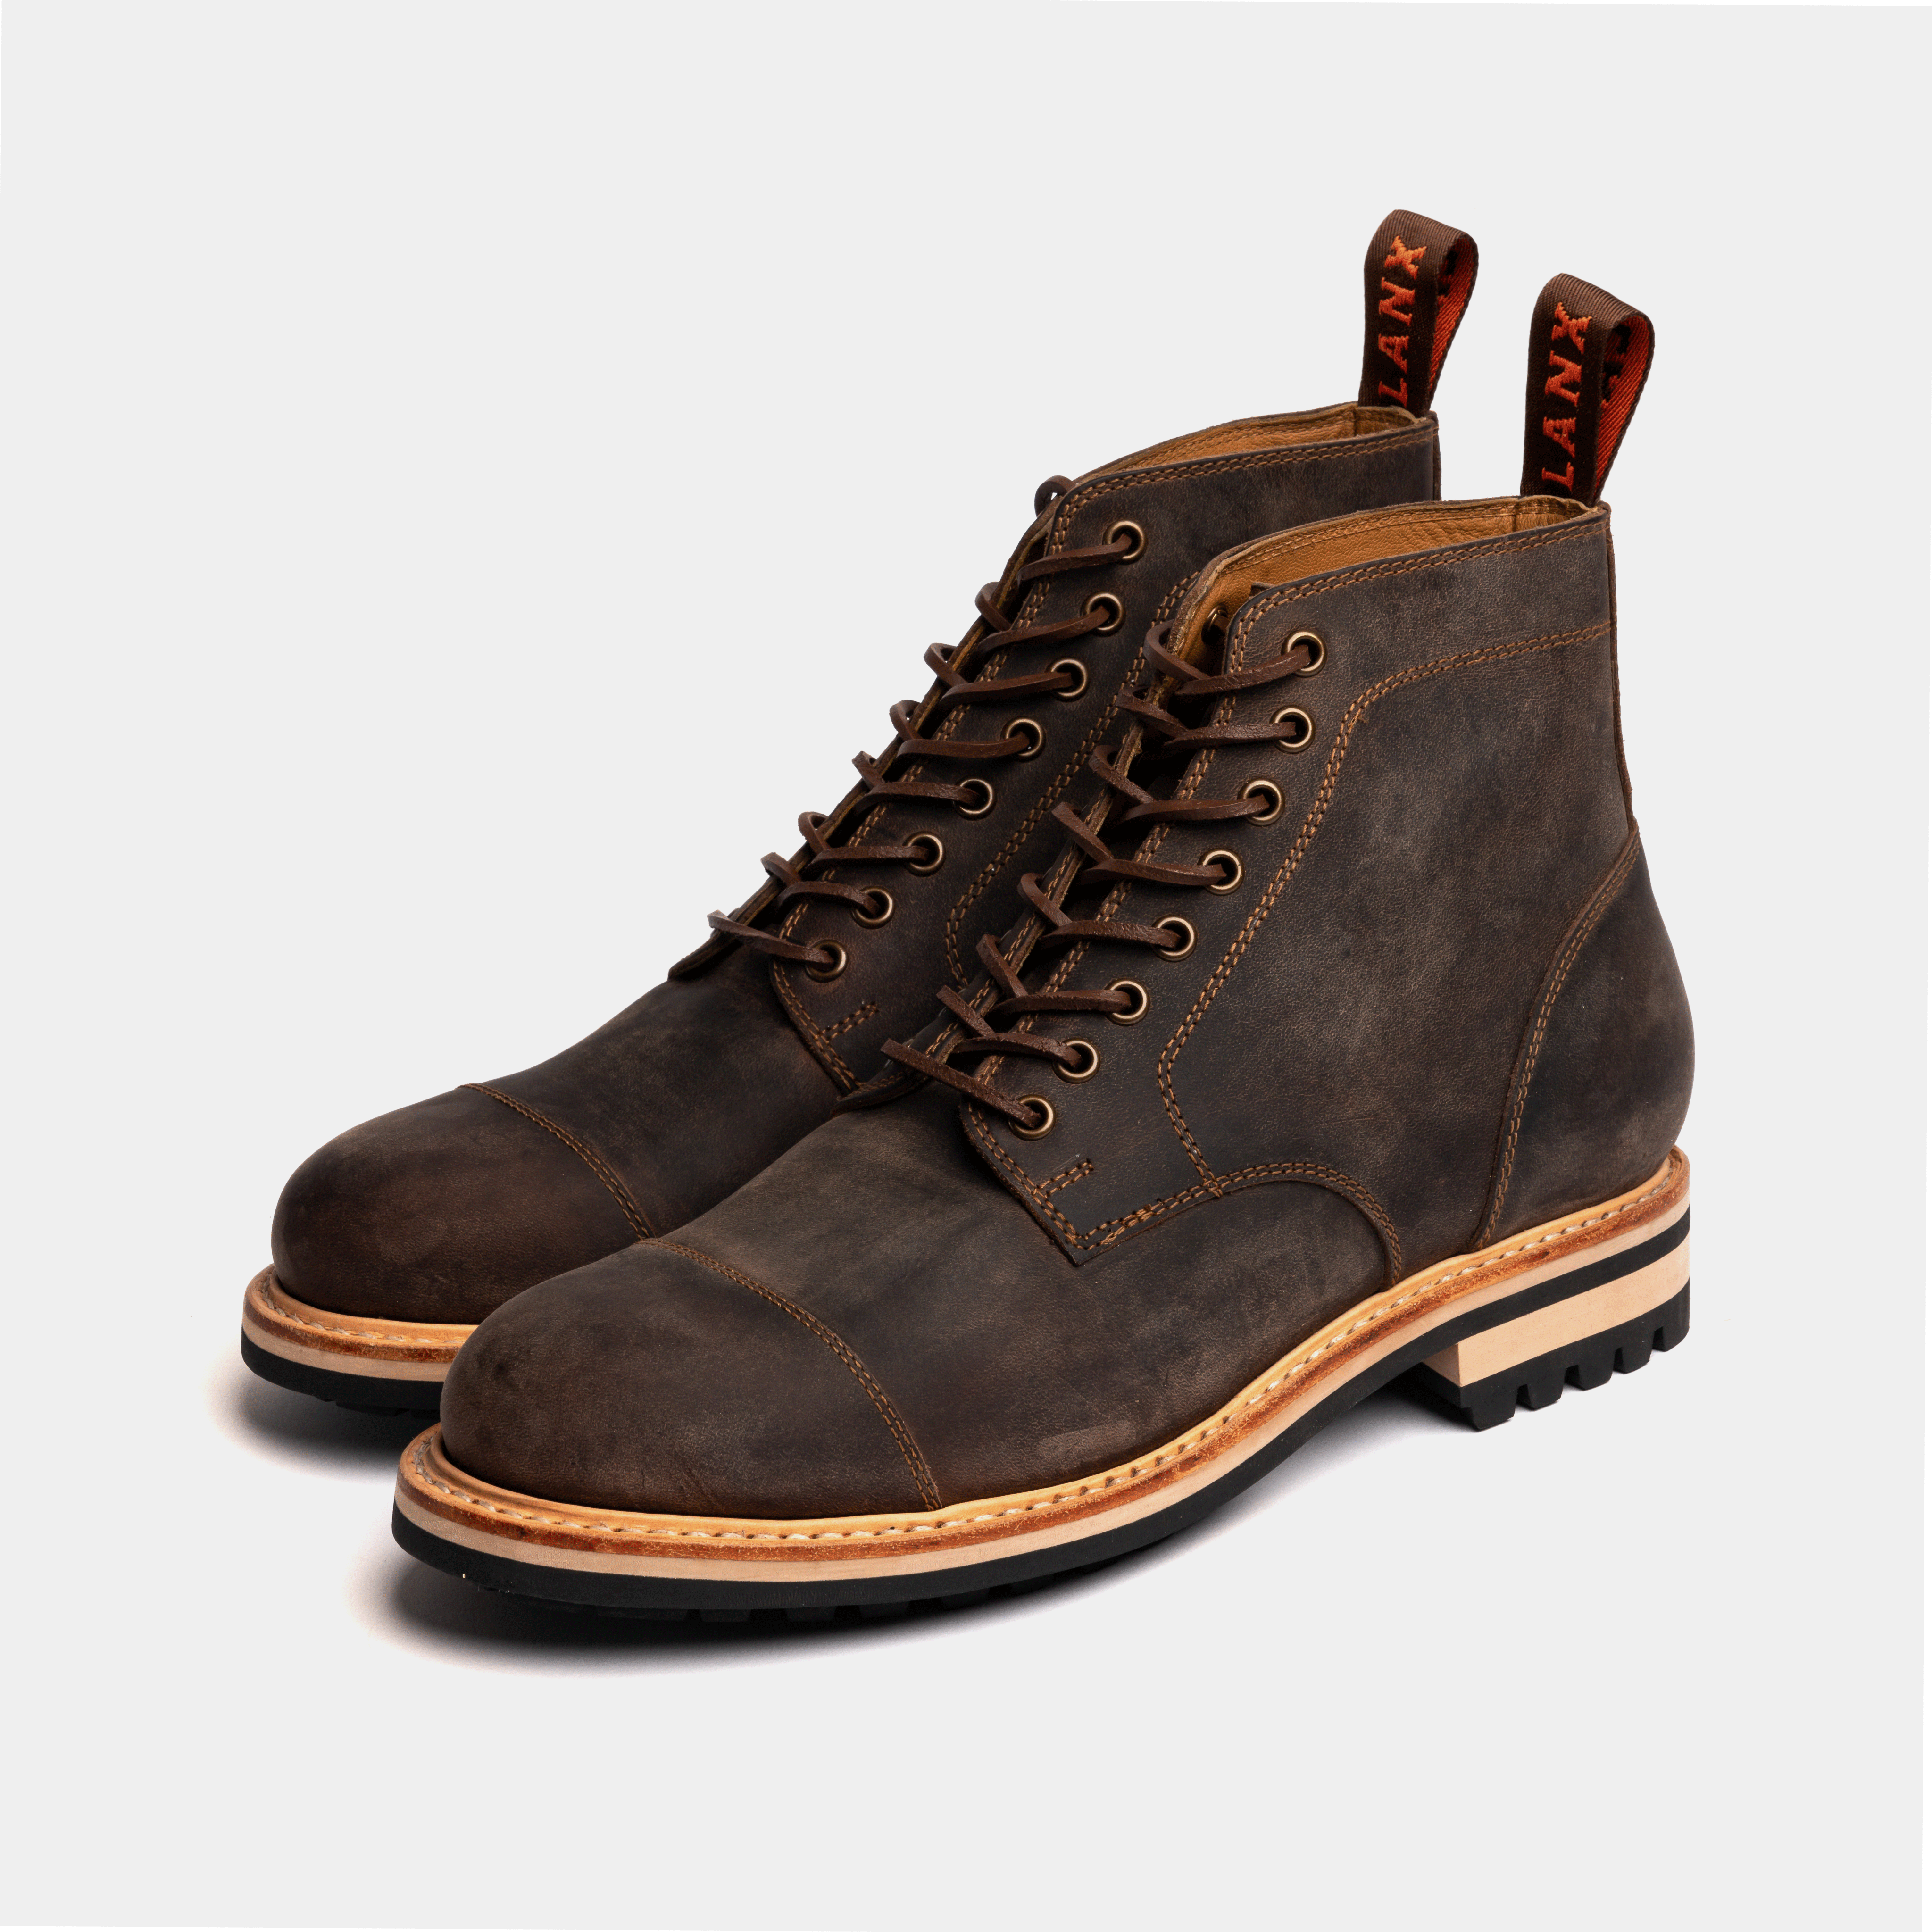 lanx-bamber-brown-distressed-goodyear-welted-boots-1.png